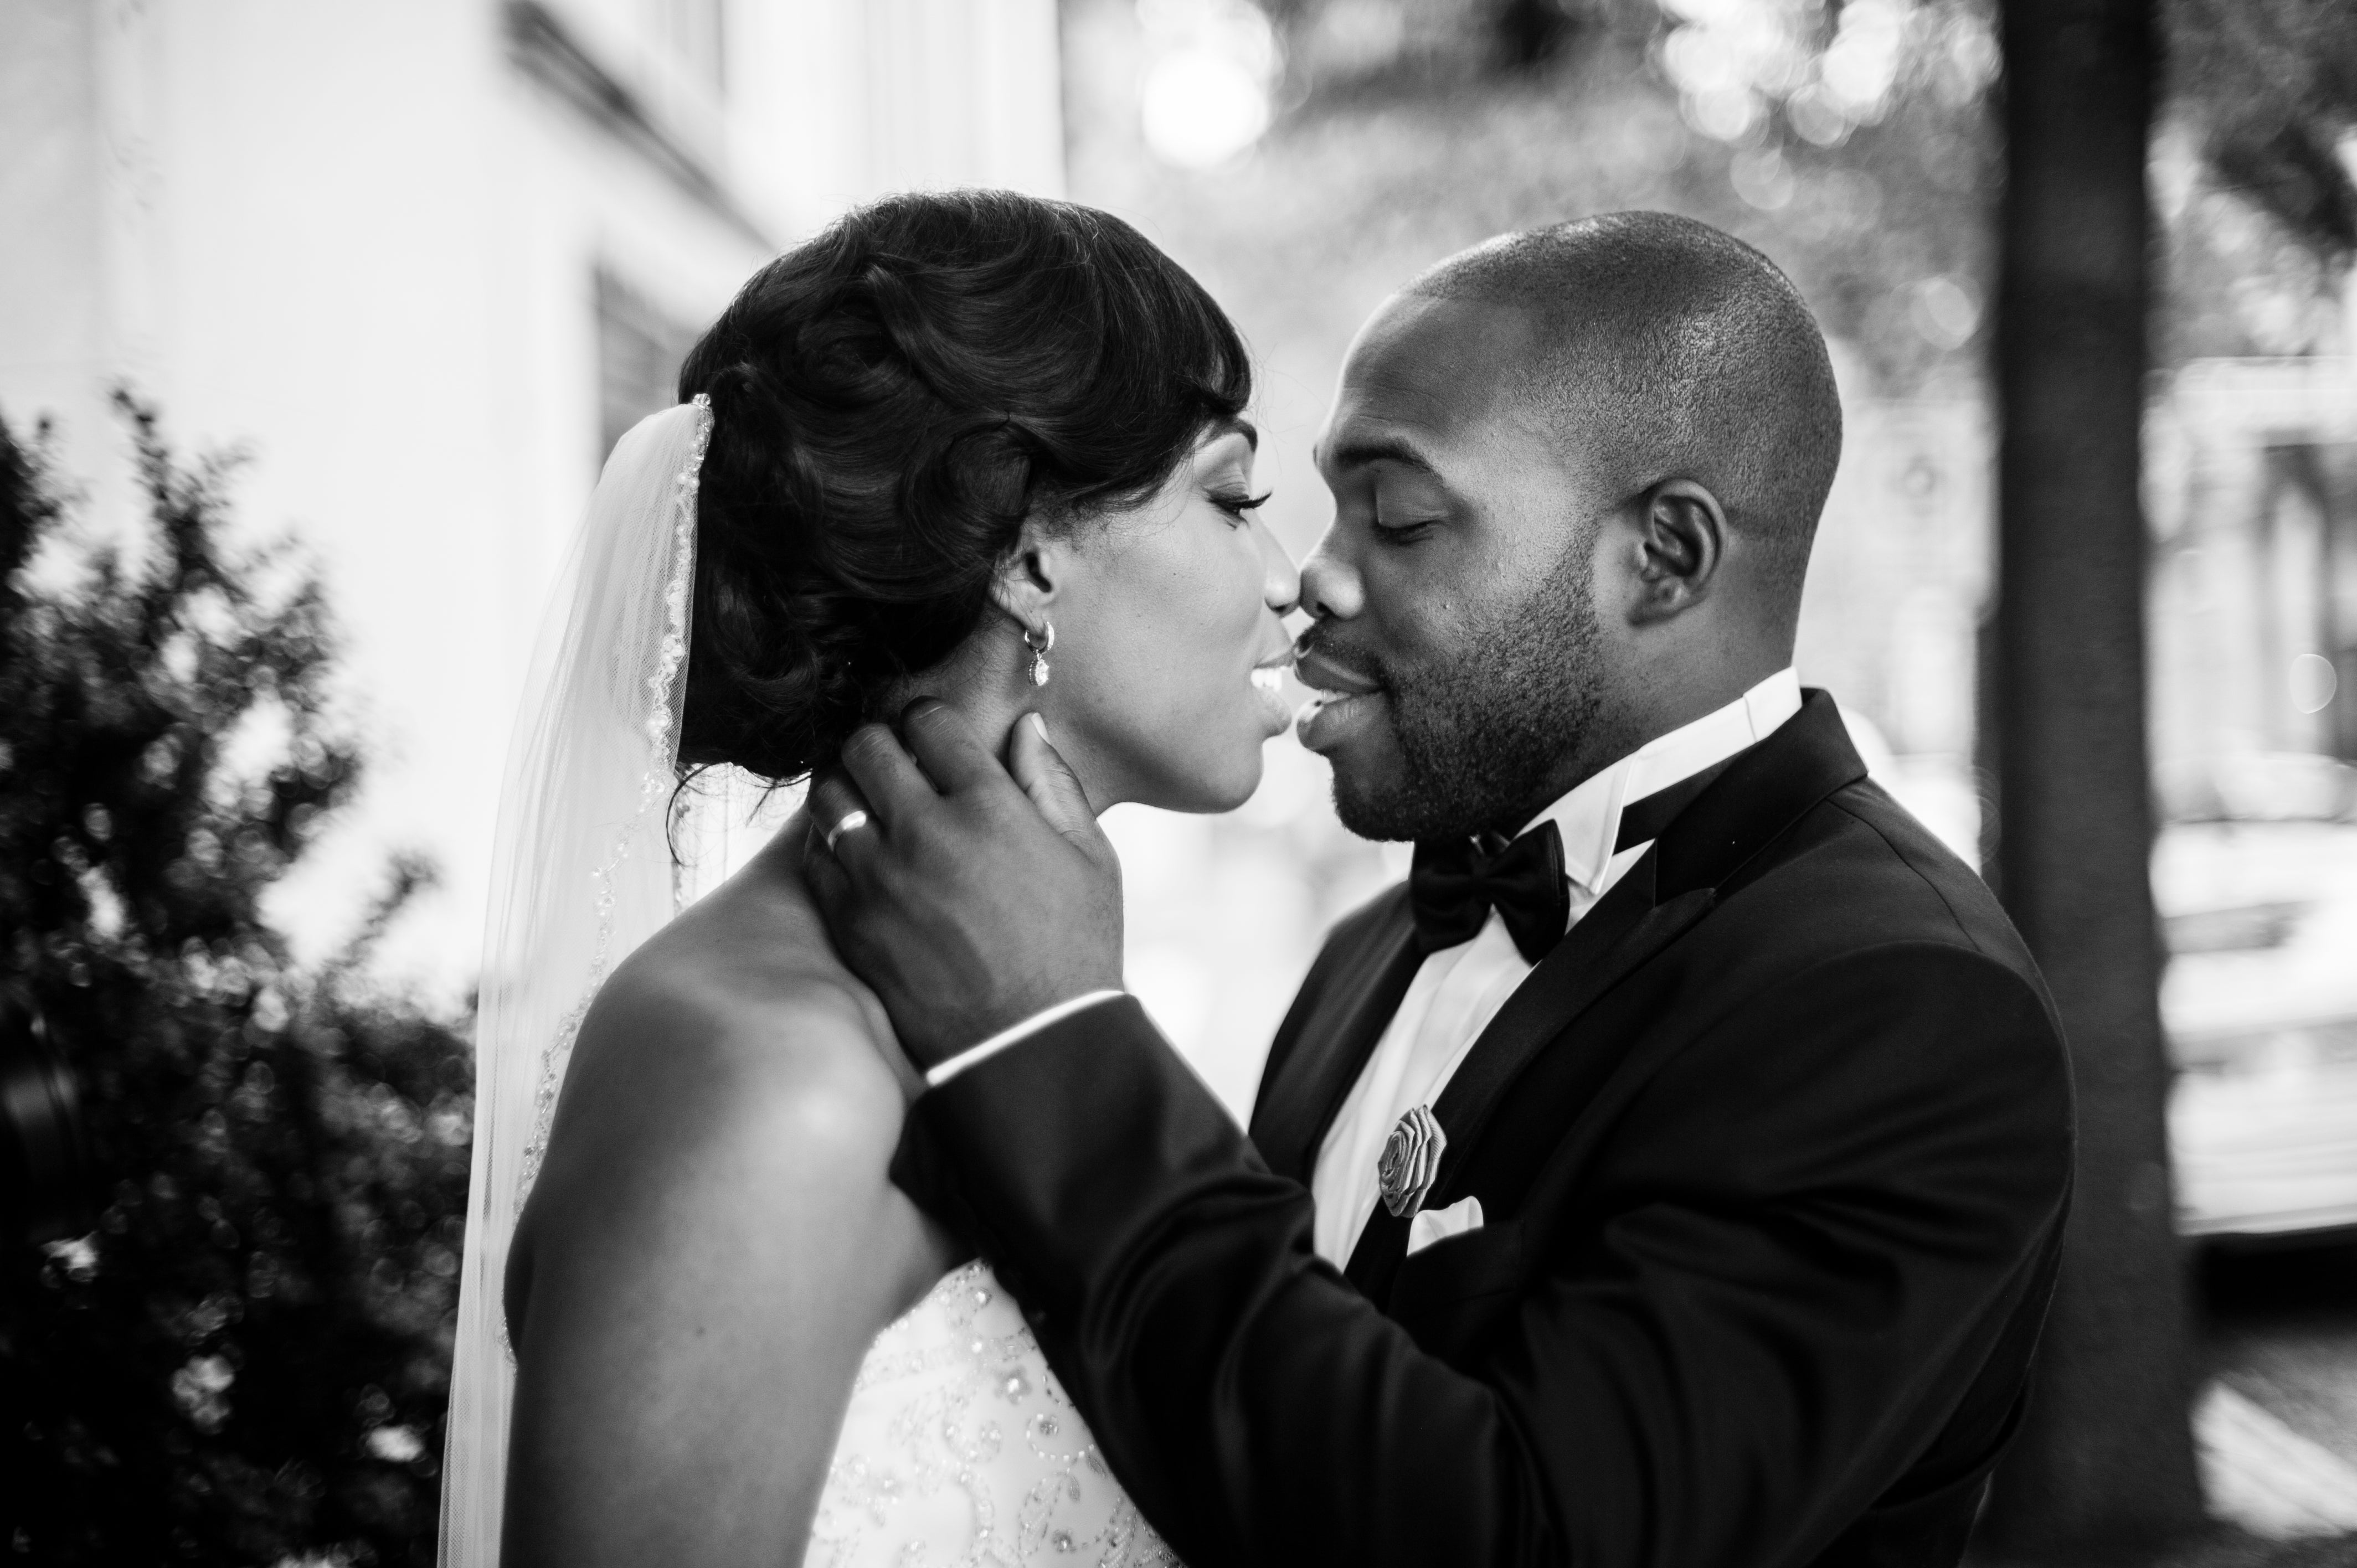 Bridal Bliss: Justin And Stephanie's Richmond Wedding Was Where Vintage Met Glam
